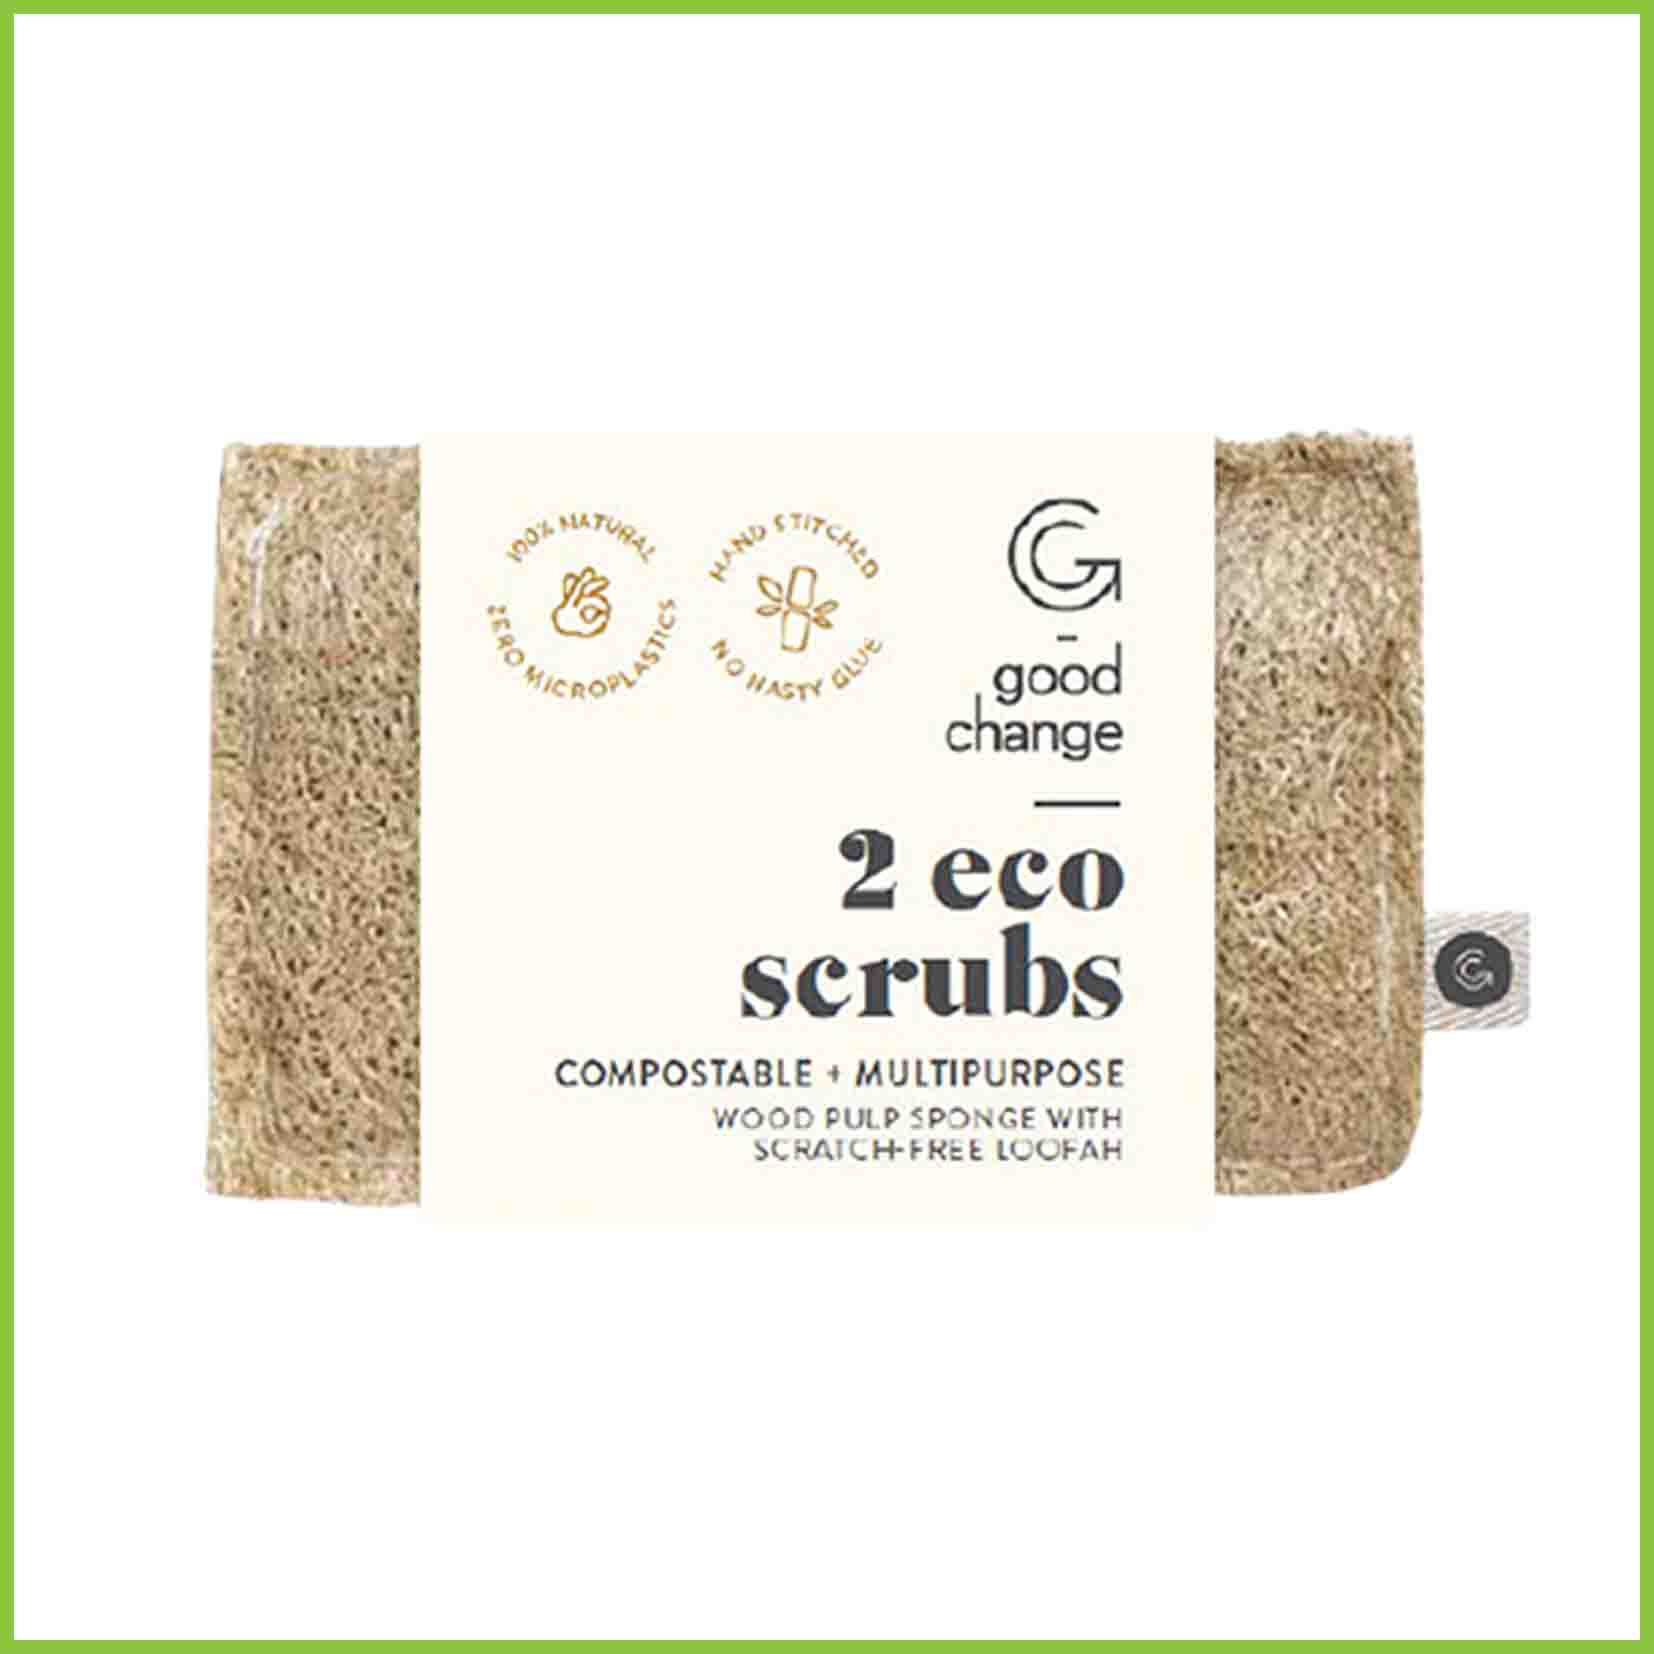 A pack of 2 Eco Scrubs from the Good Change Store NZ. This is a product shot on a white background. The two eco scrubs are wrapped in a simple cardboard sleeve packaging.